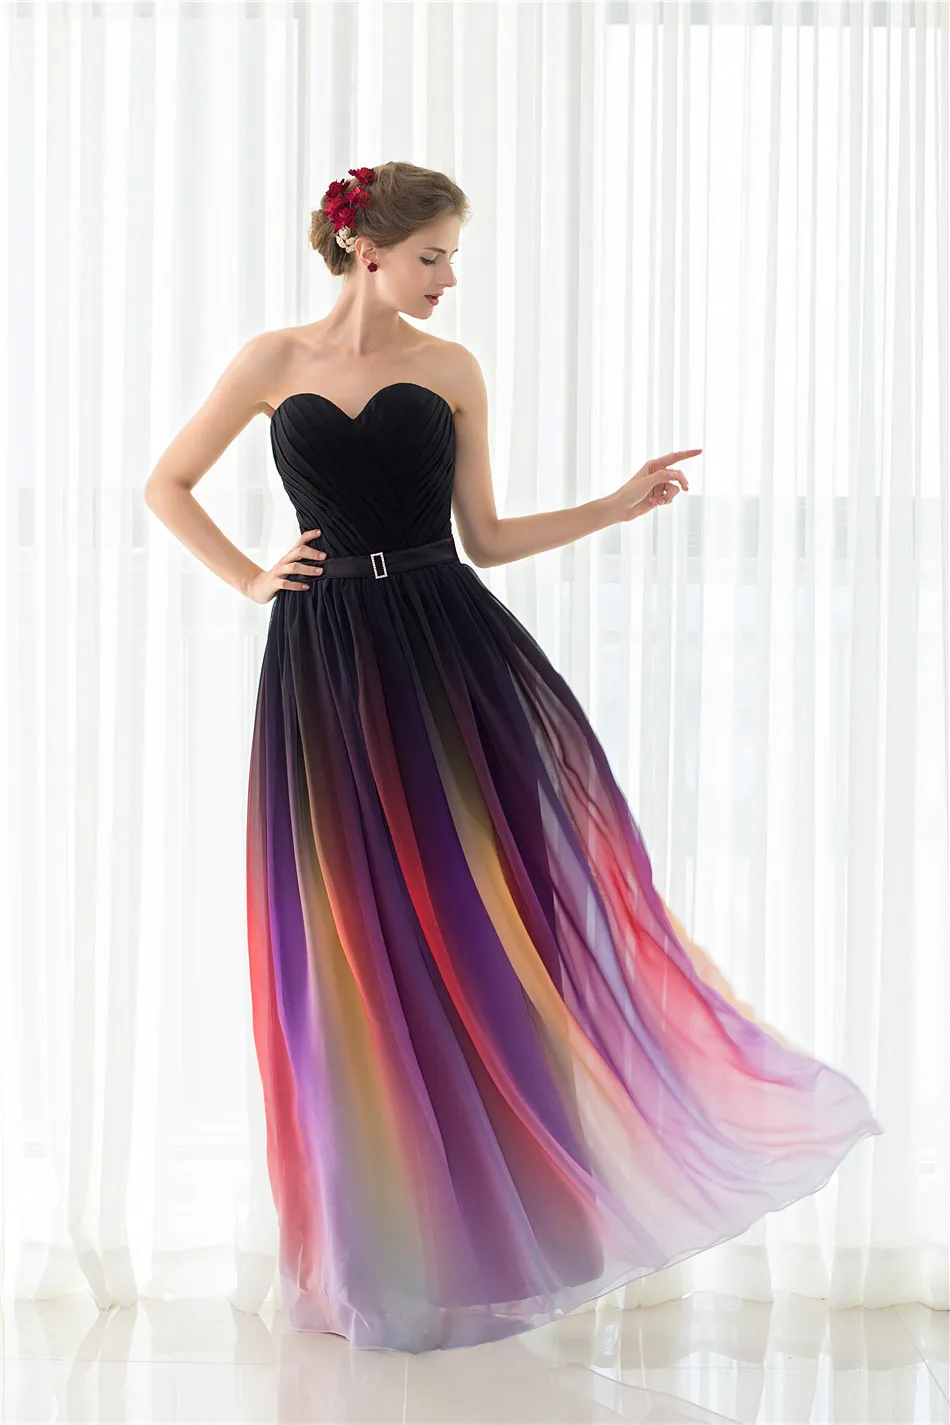 New Arrival Sweetheart Long Gradient Color Chiffon Long Prom Dress Ombre Evening Dress Lace Up Back In Stock